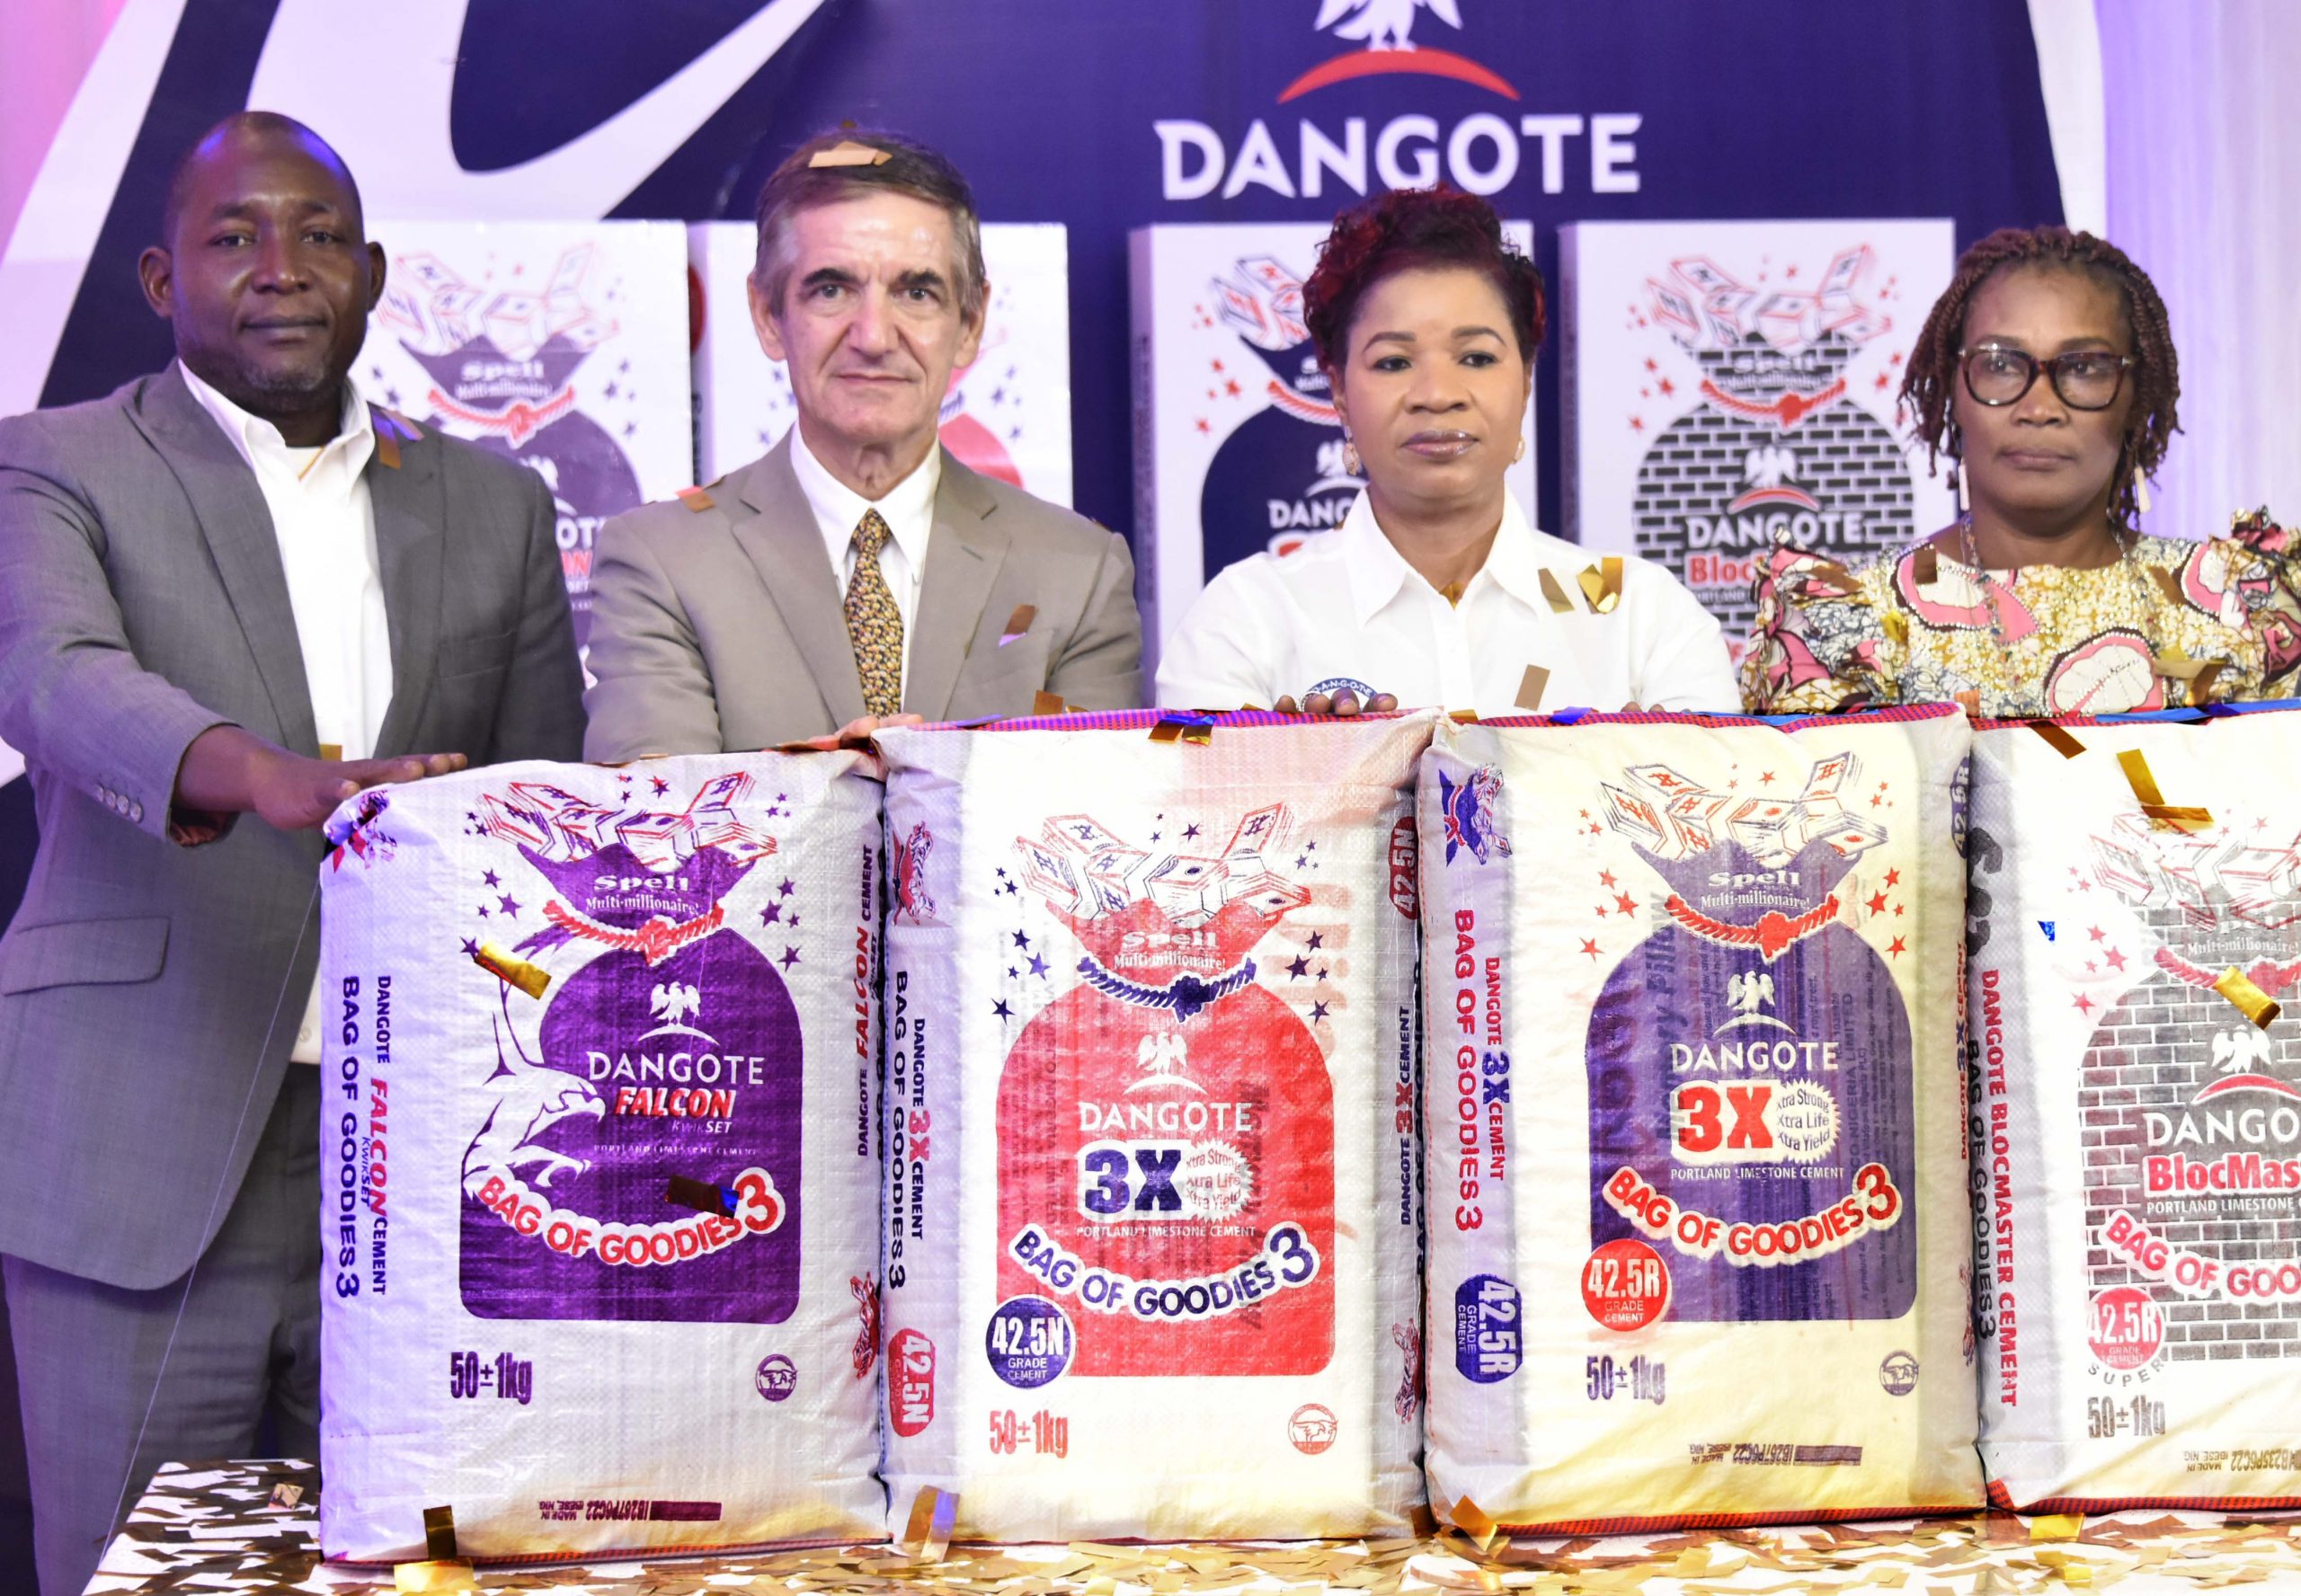 Dangote says the new cement promo is a way of giving back N1billion to its customers